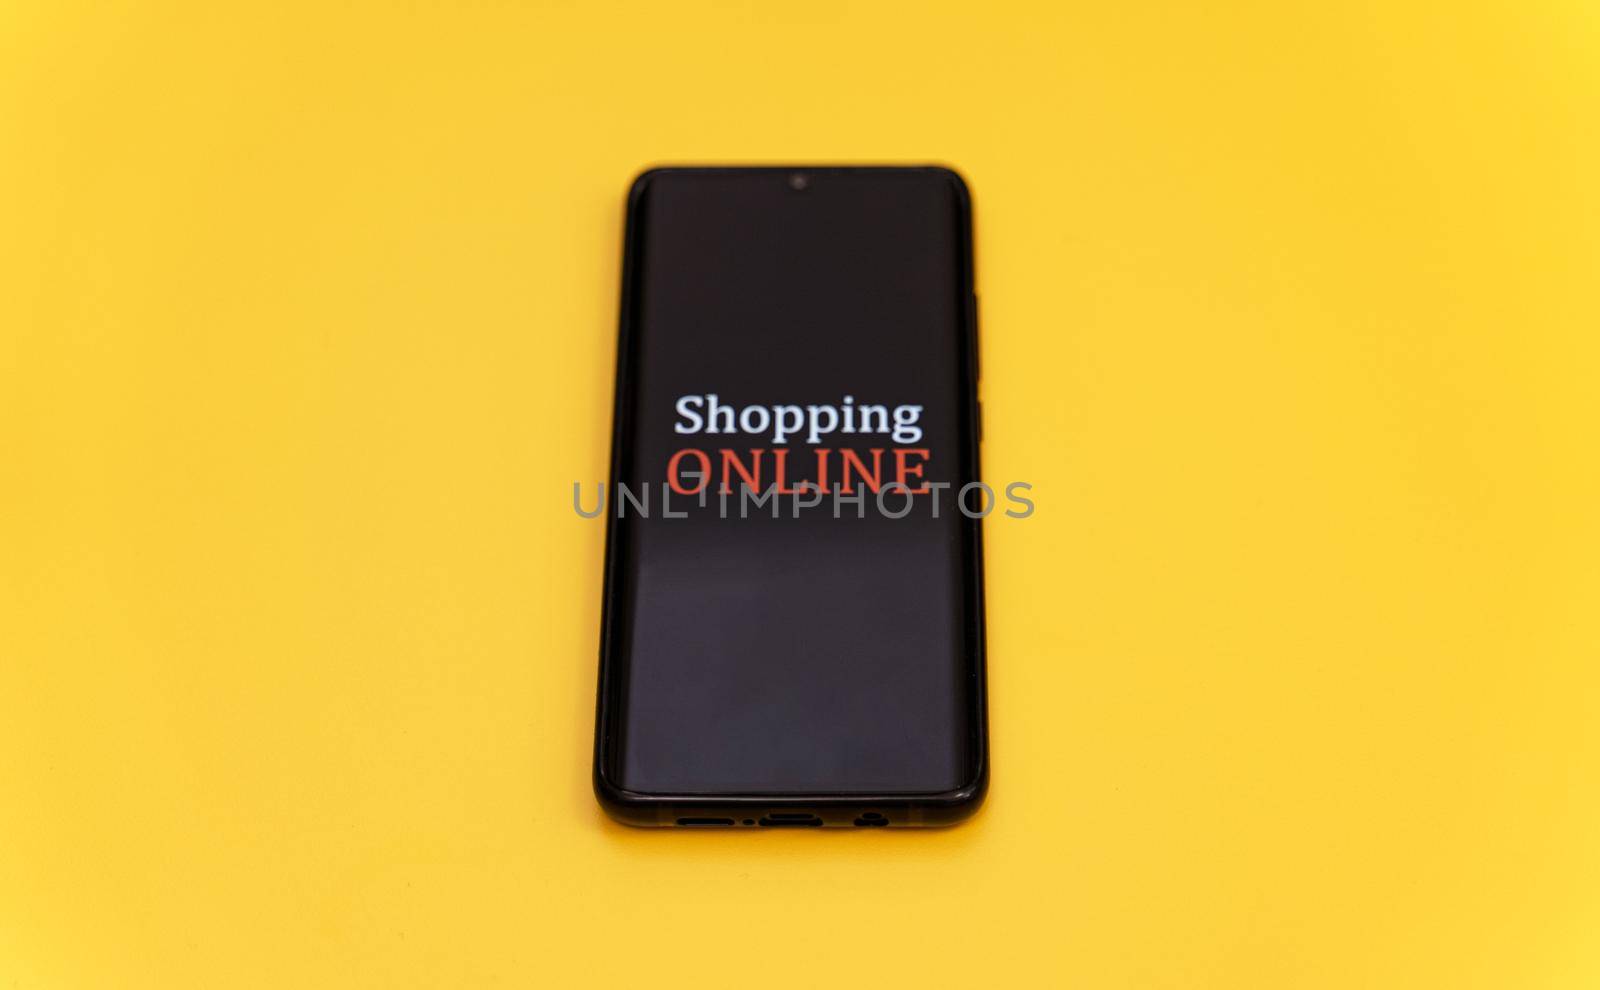 Smartphone on yellow background. Online shopping concept.